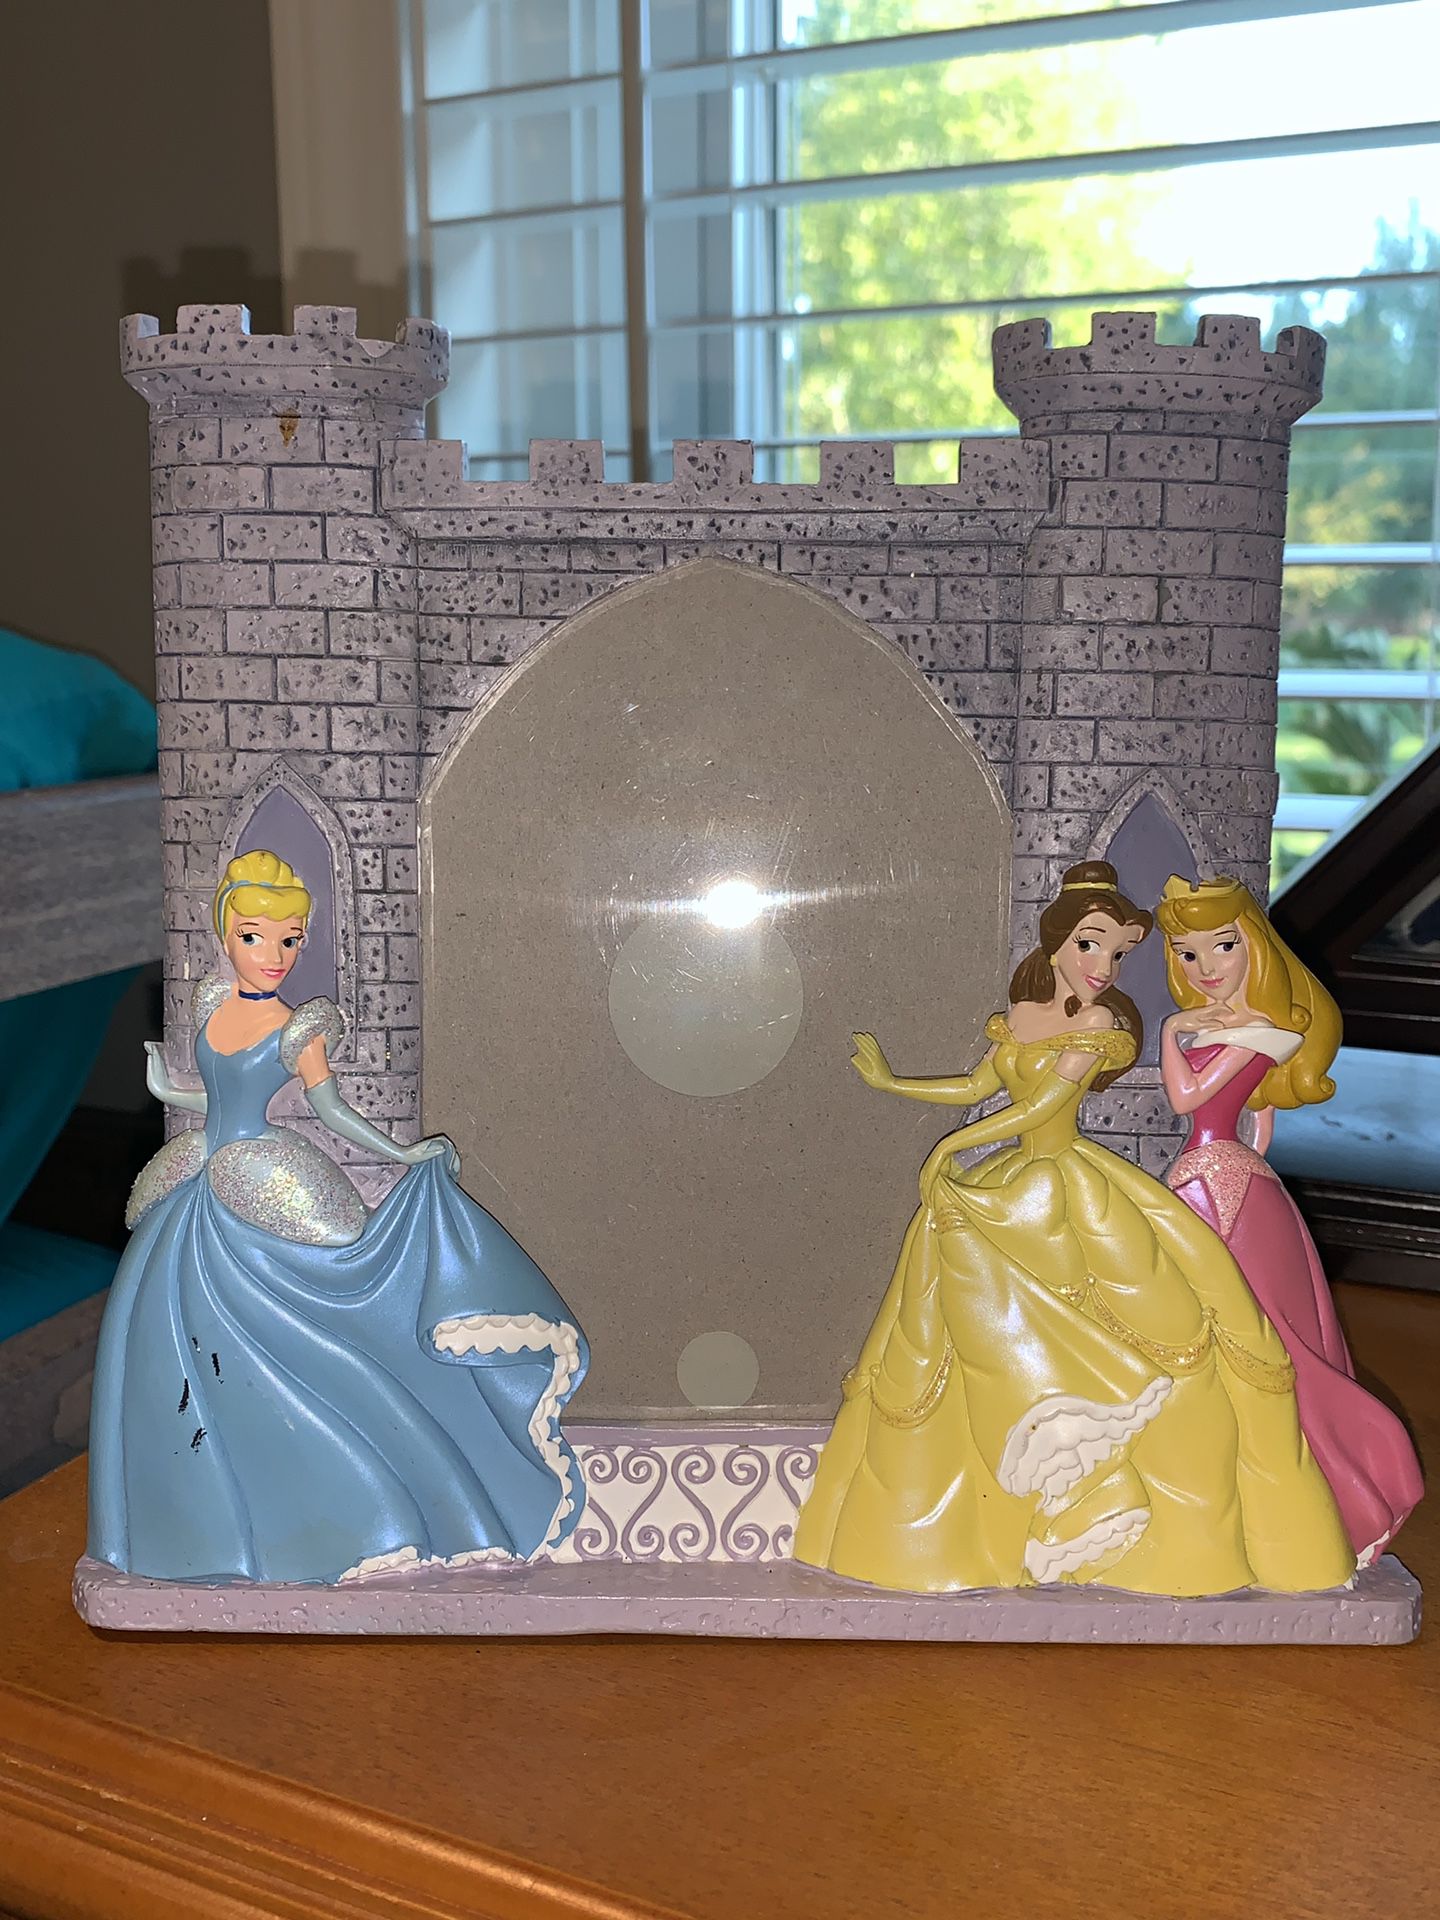 New Disney Princess picture frame from Disney world